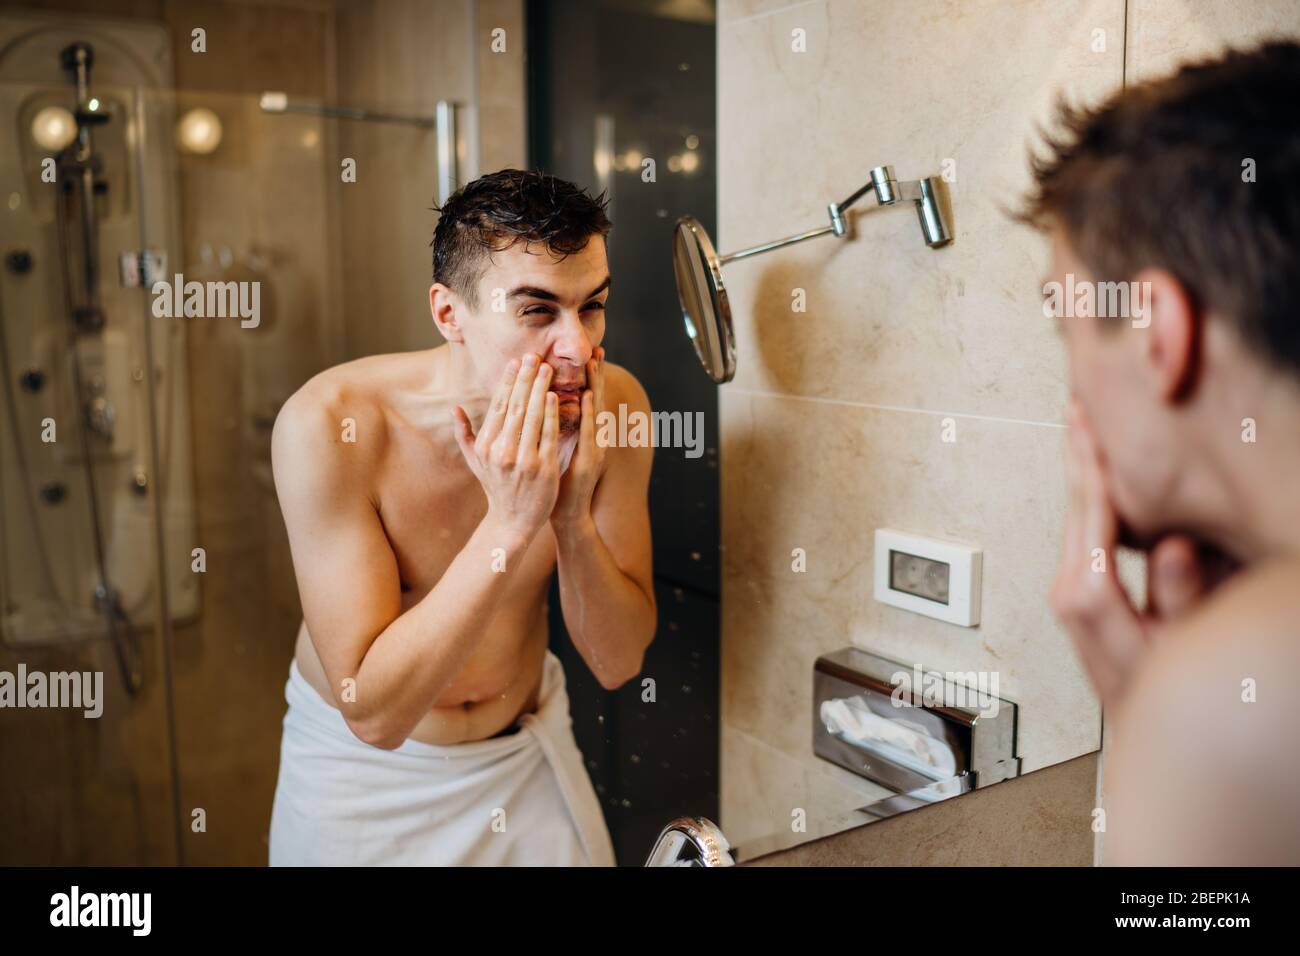 Young man having a shaving daily beard grooming routine,applying aftershave lotion.Allergic itchy rash burn reaction to hygiene skin care product.Faci Stock Photo